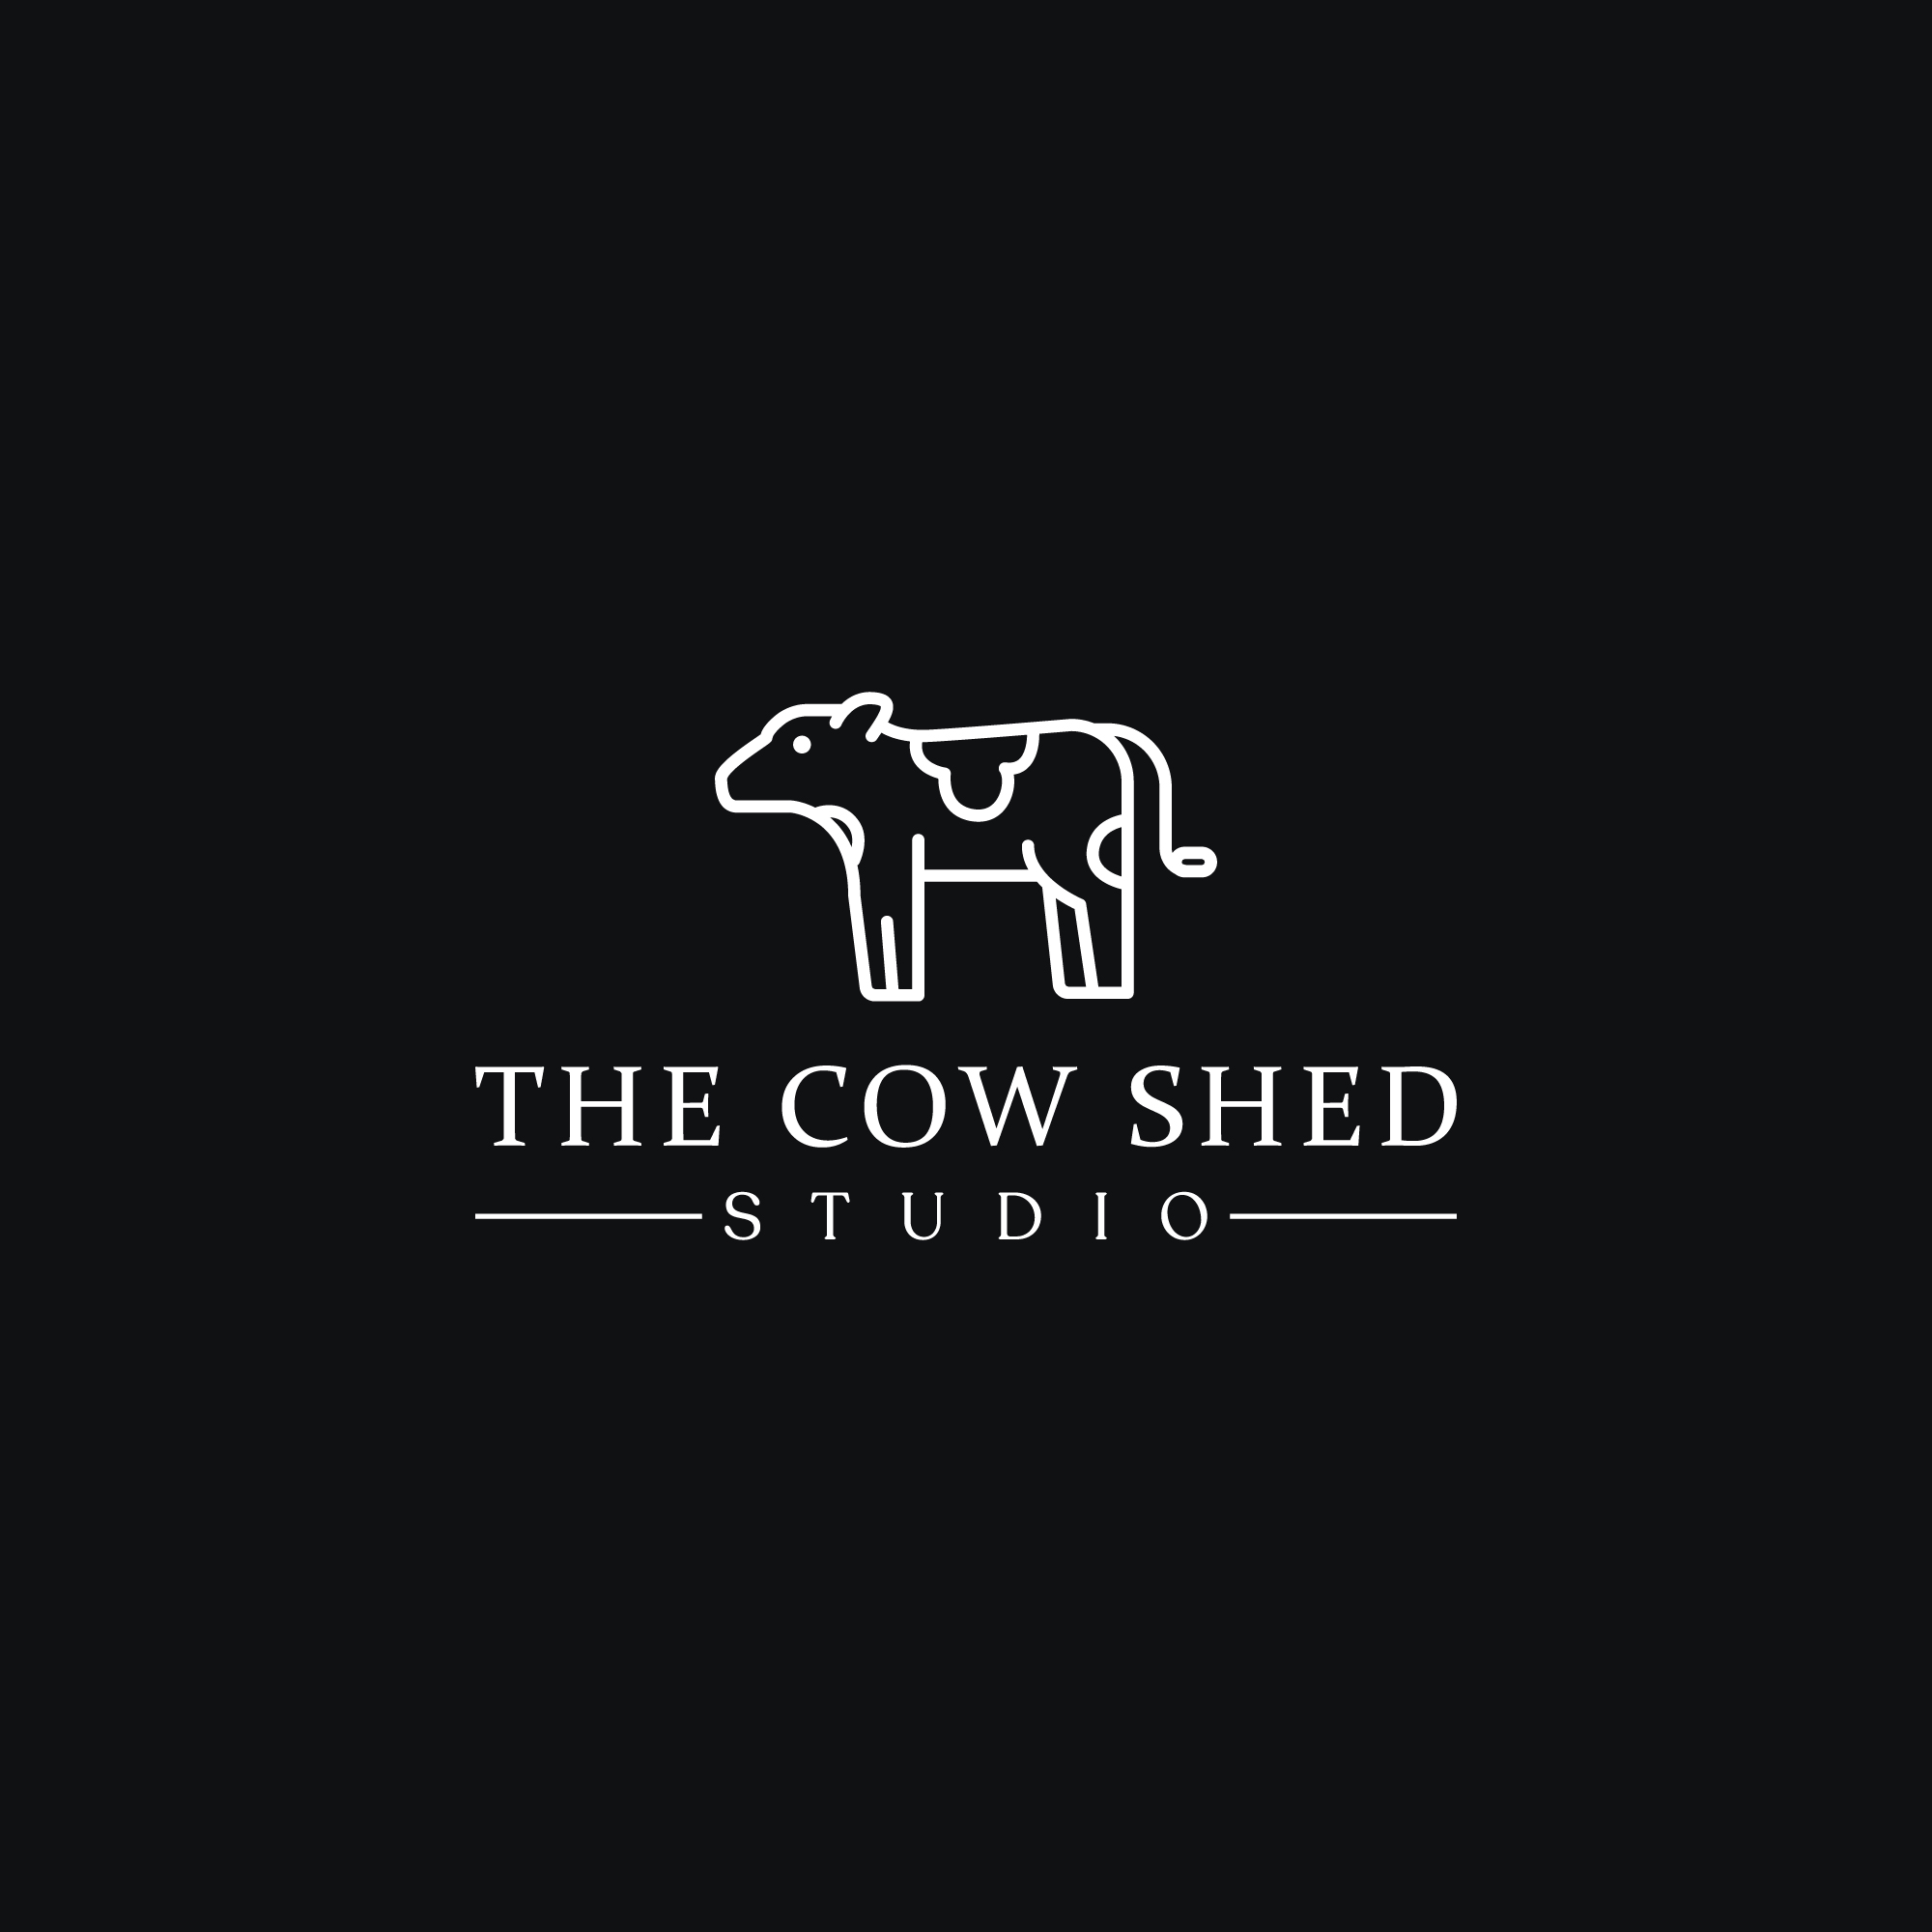 The Cow Shed Studio's logo